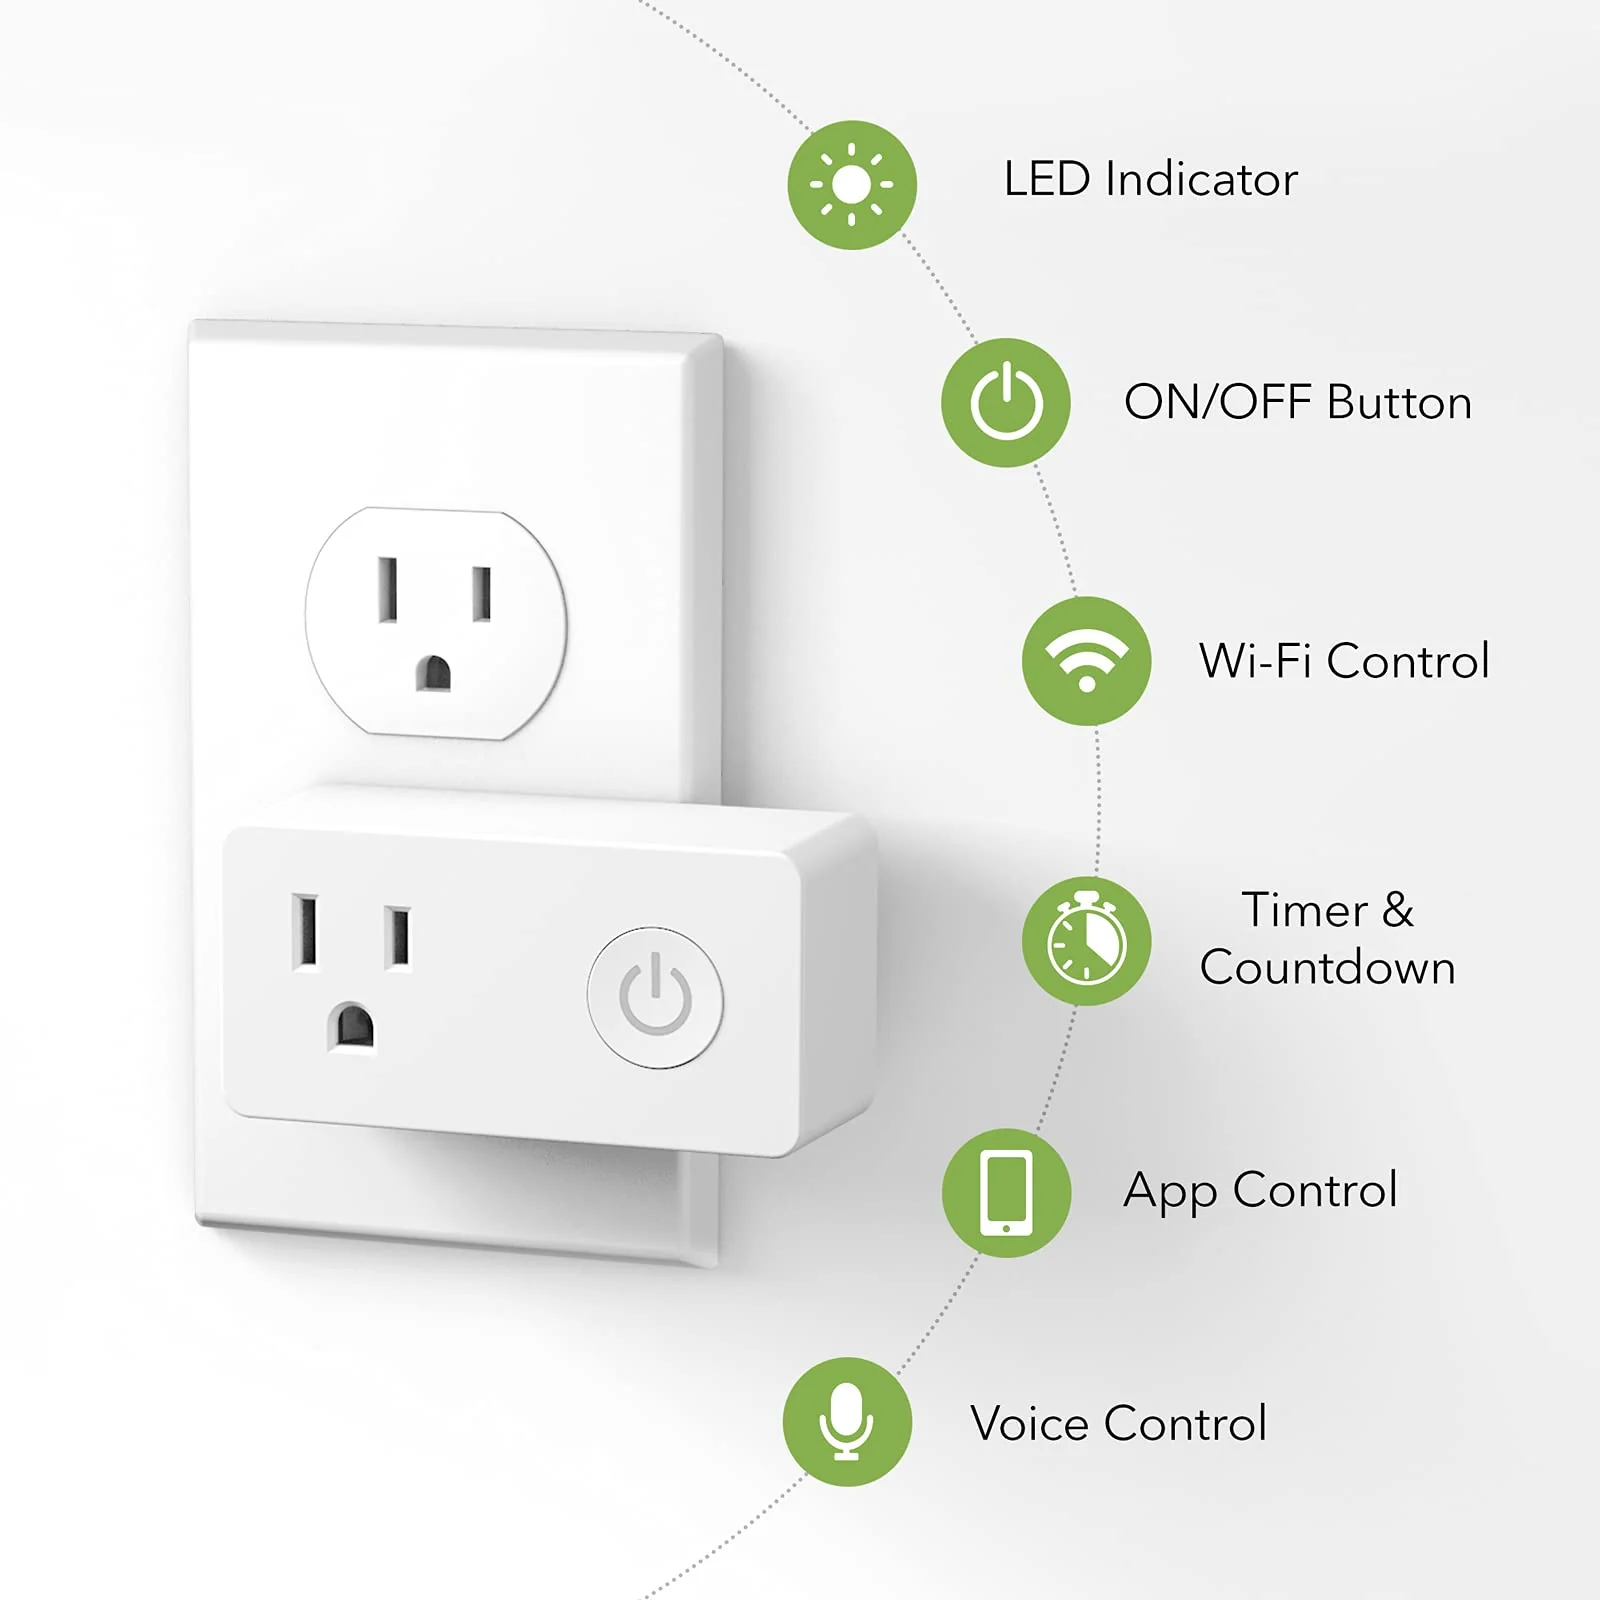 Experience Convenience and Automation with the BN-LINK Smart WiFi Outlet Hubless Timer